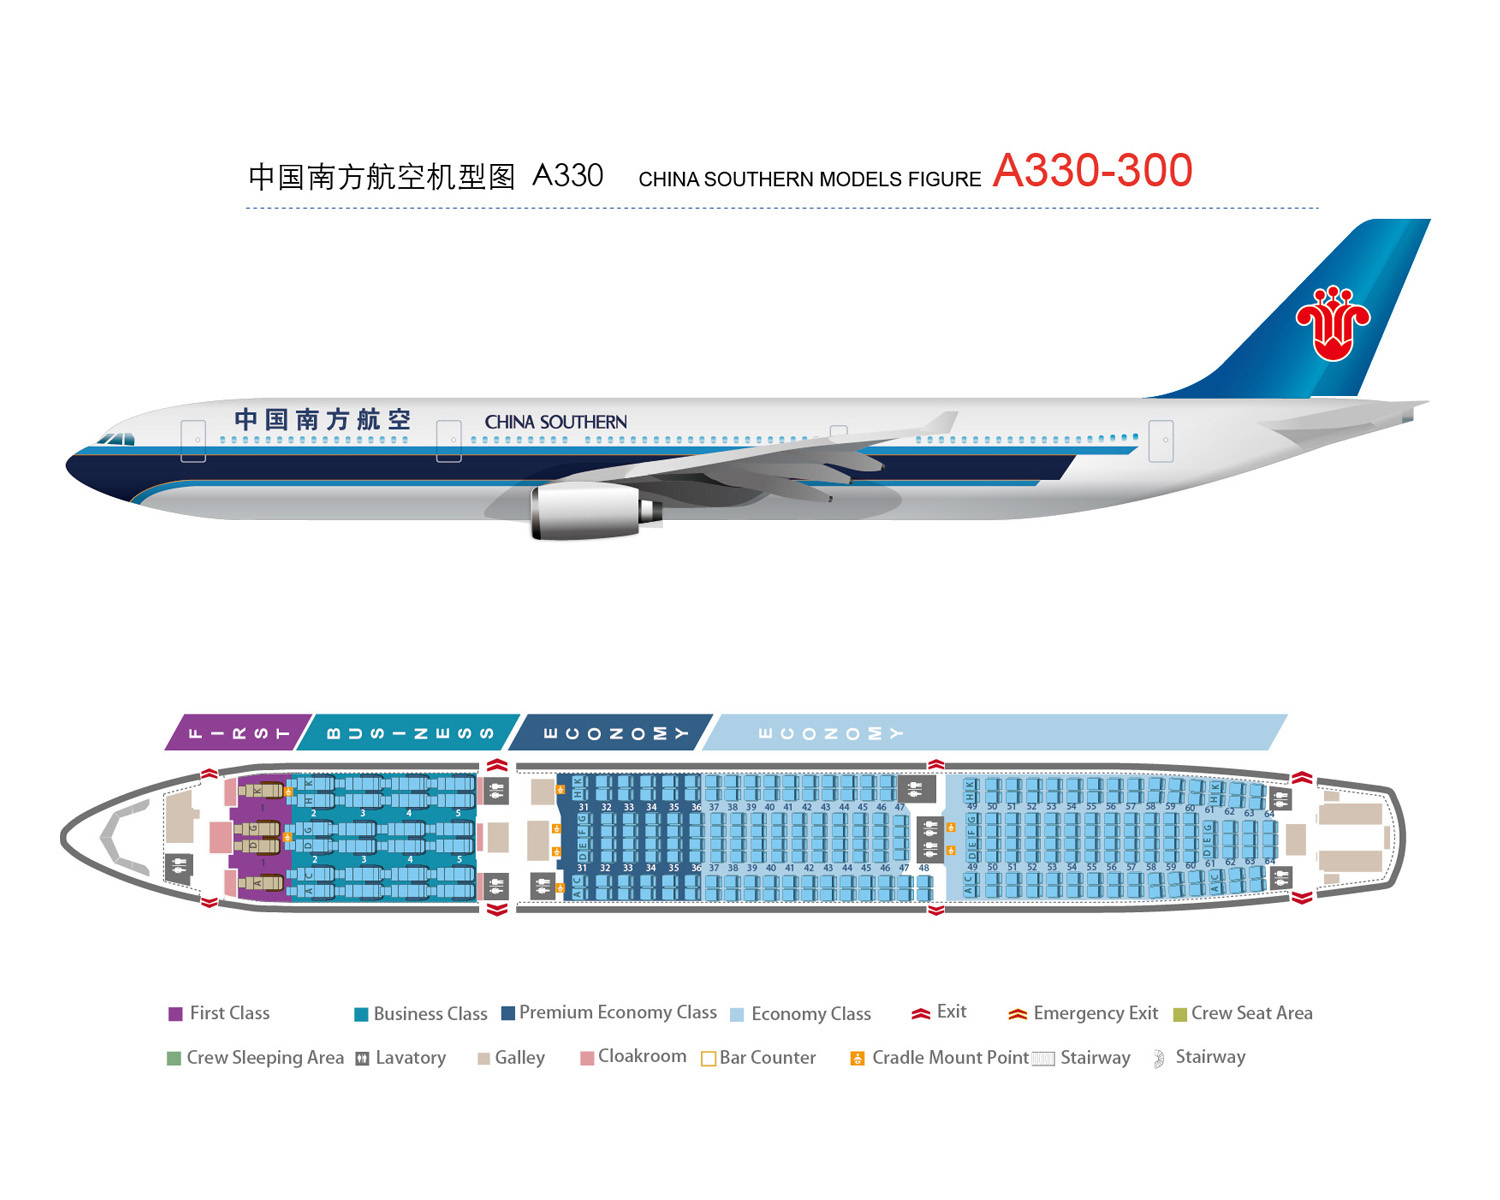 A330 300 Profile Of Airbus Company China Southern Airlines Co Ltd